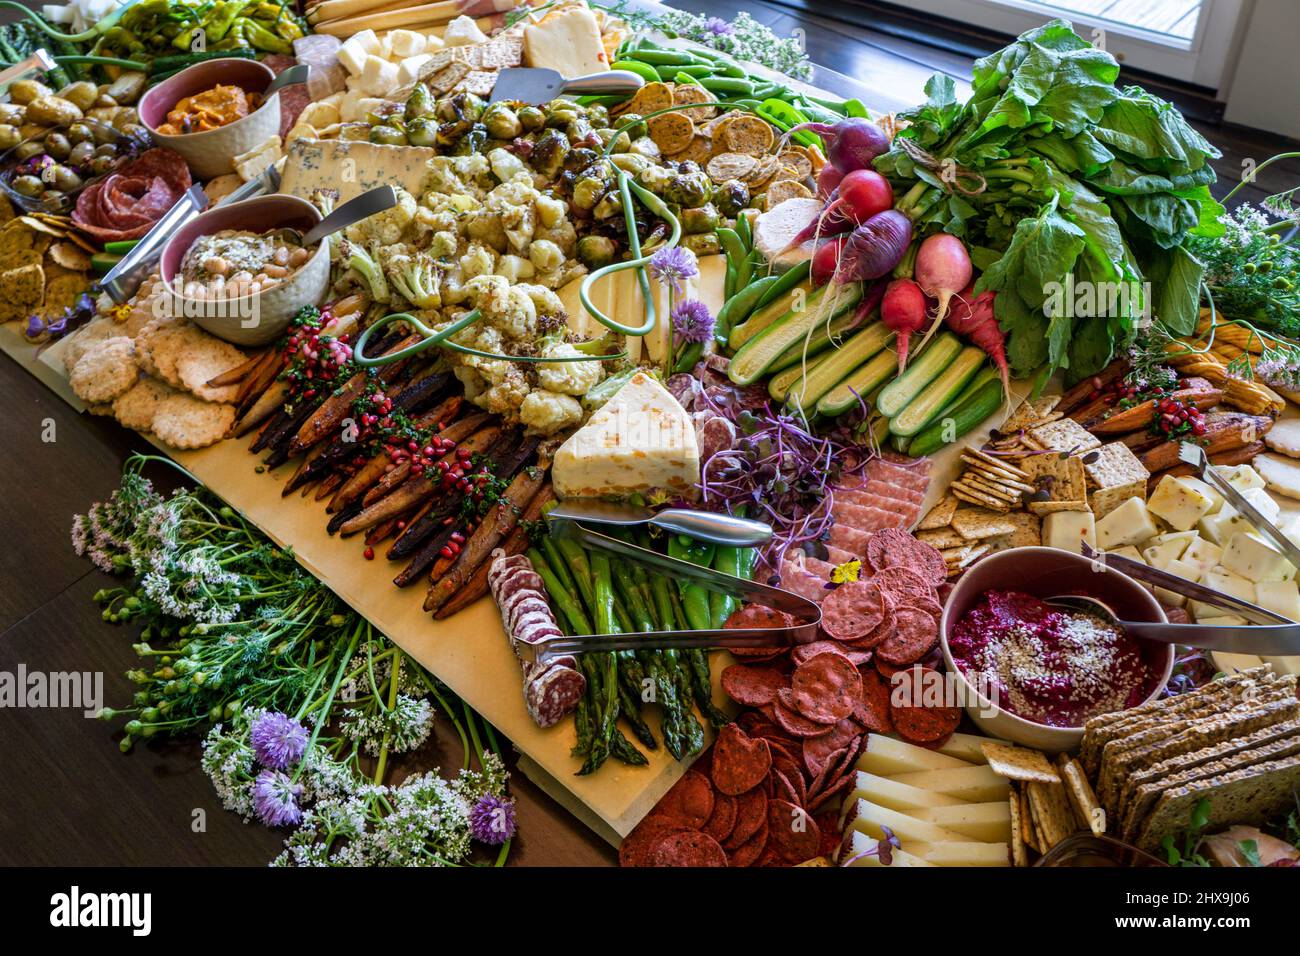 Grazing Board with various Charcuterie, Fruits, Vegetables and Cheese Stock Photo